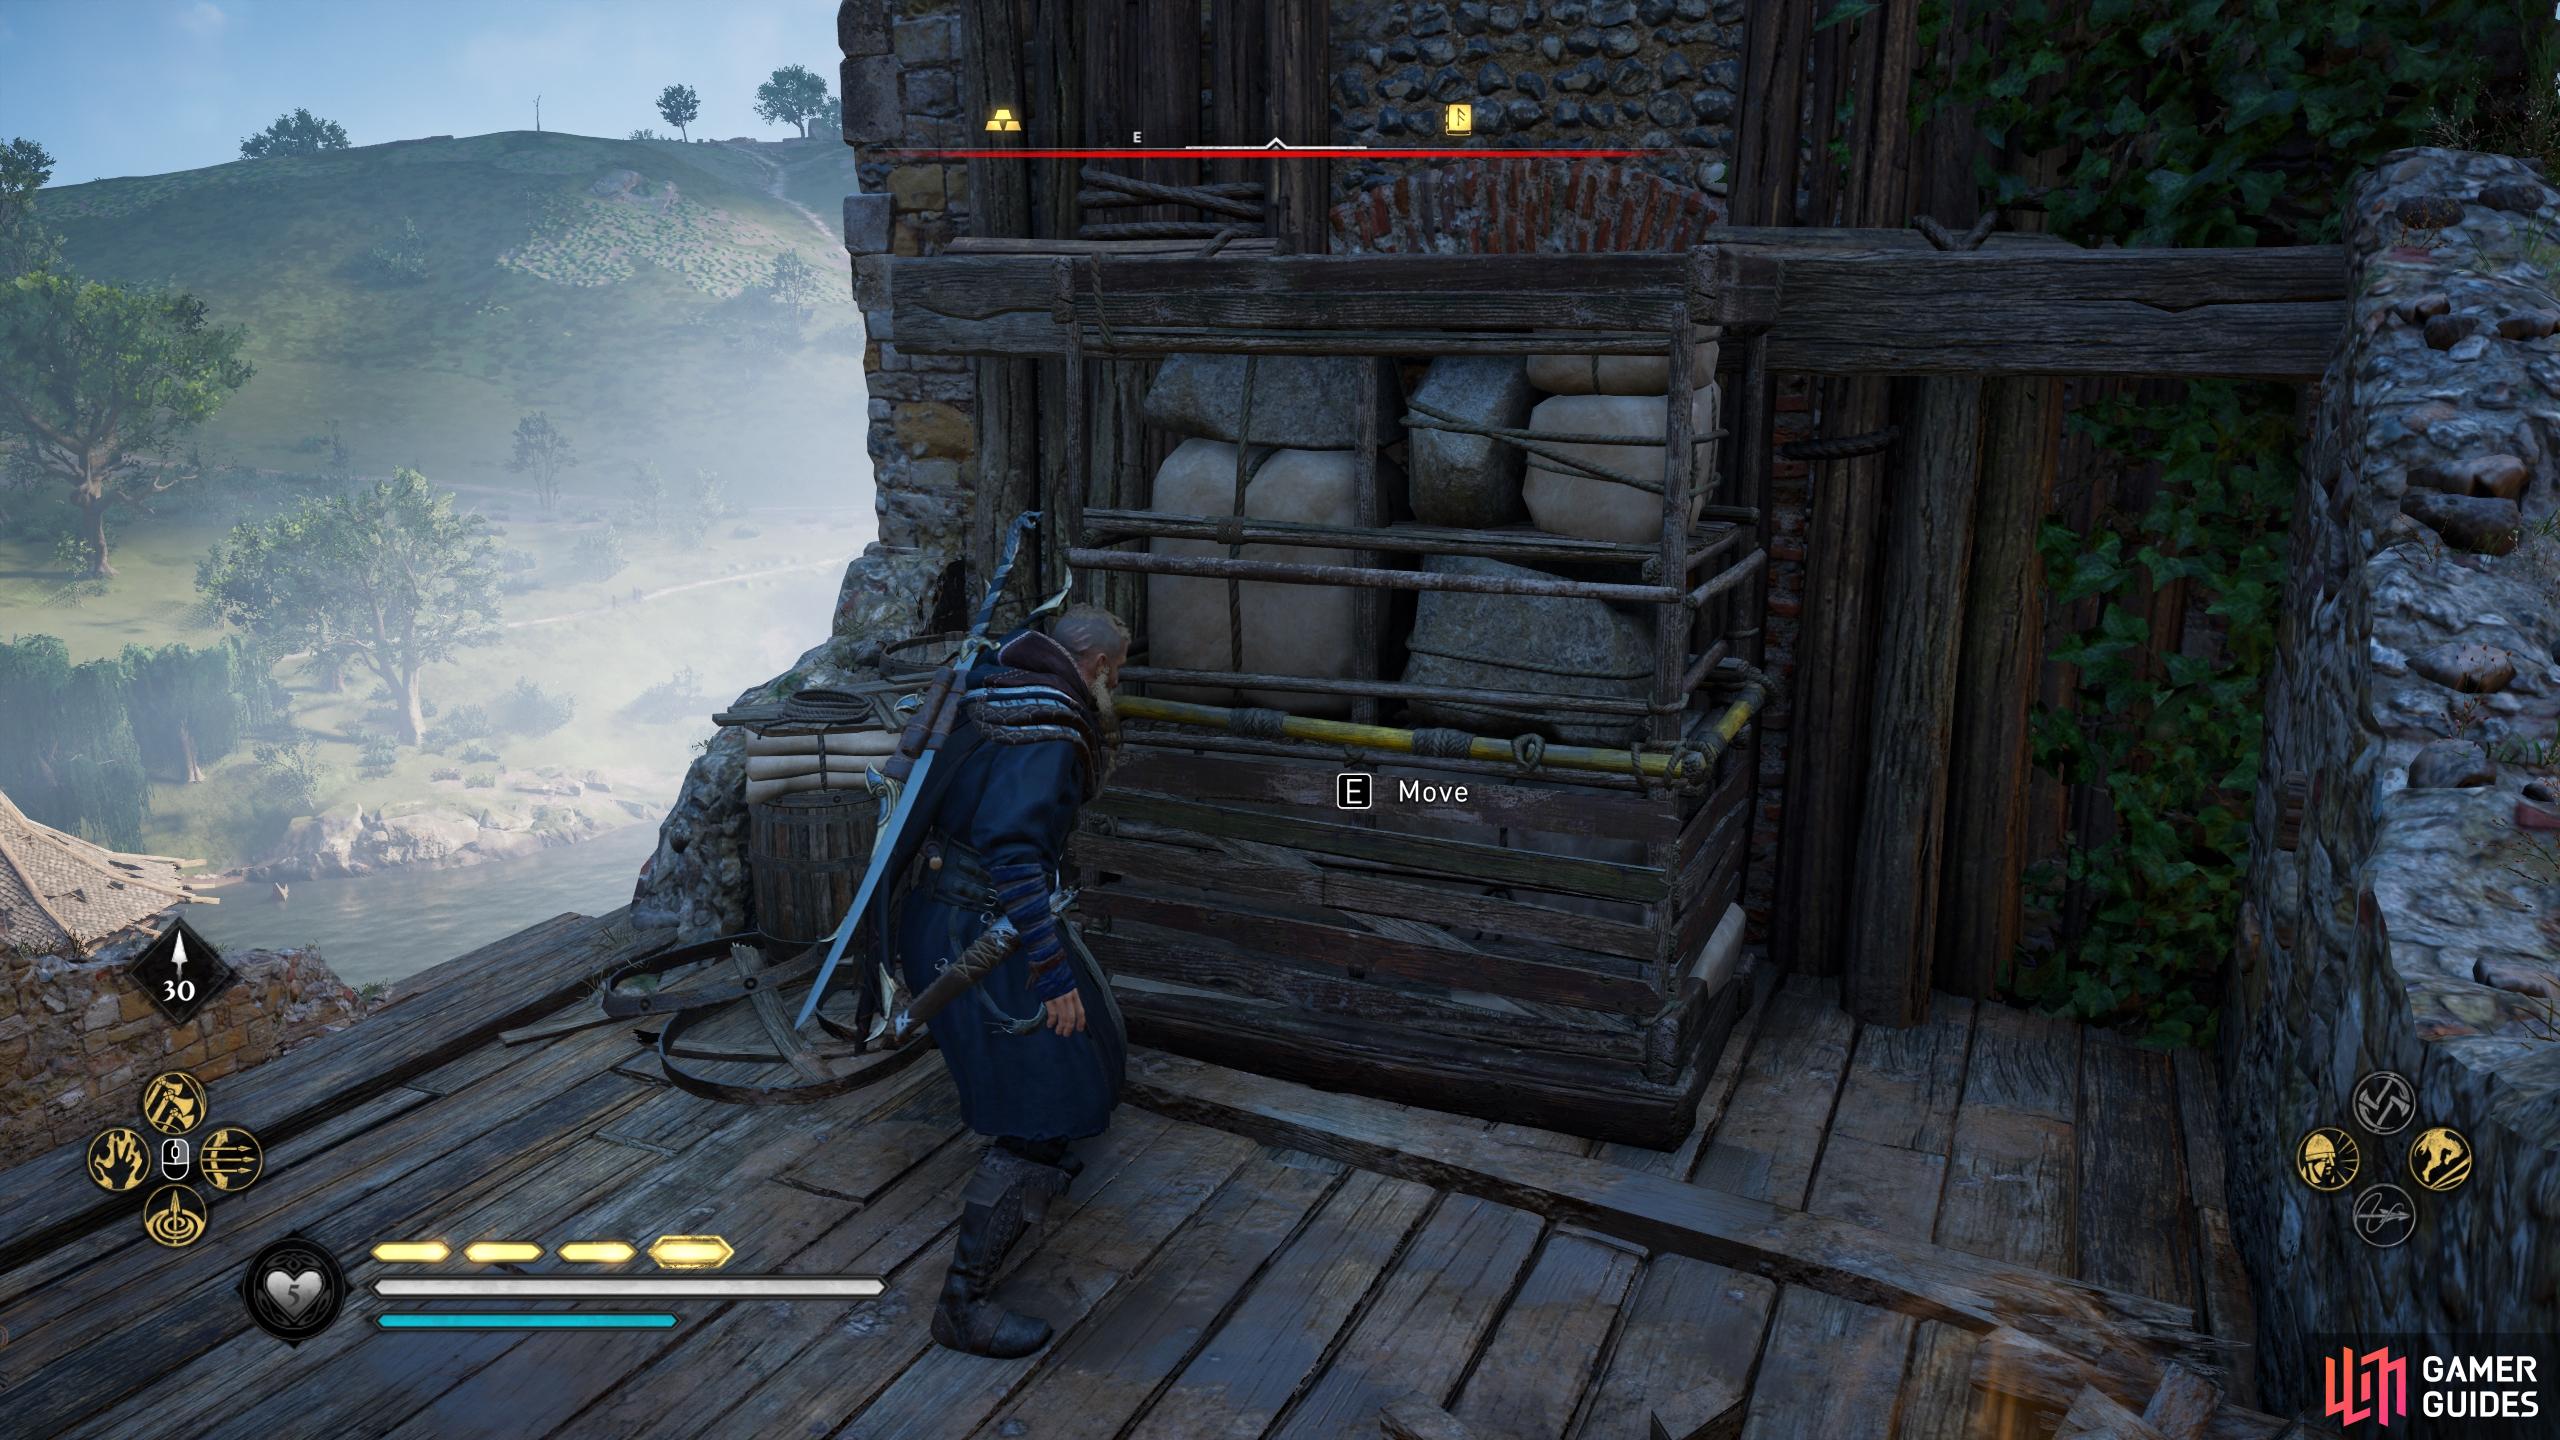 Once youre at the top of the tower, go to the northwestern side and move the barricade to the right.